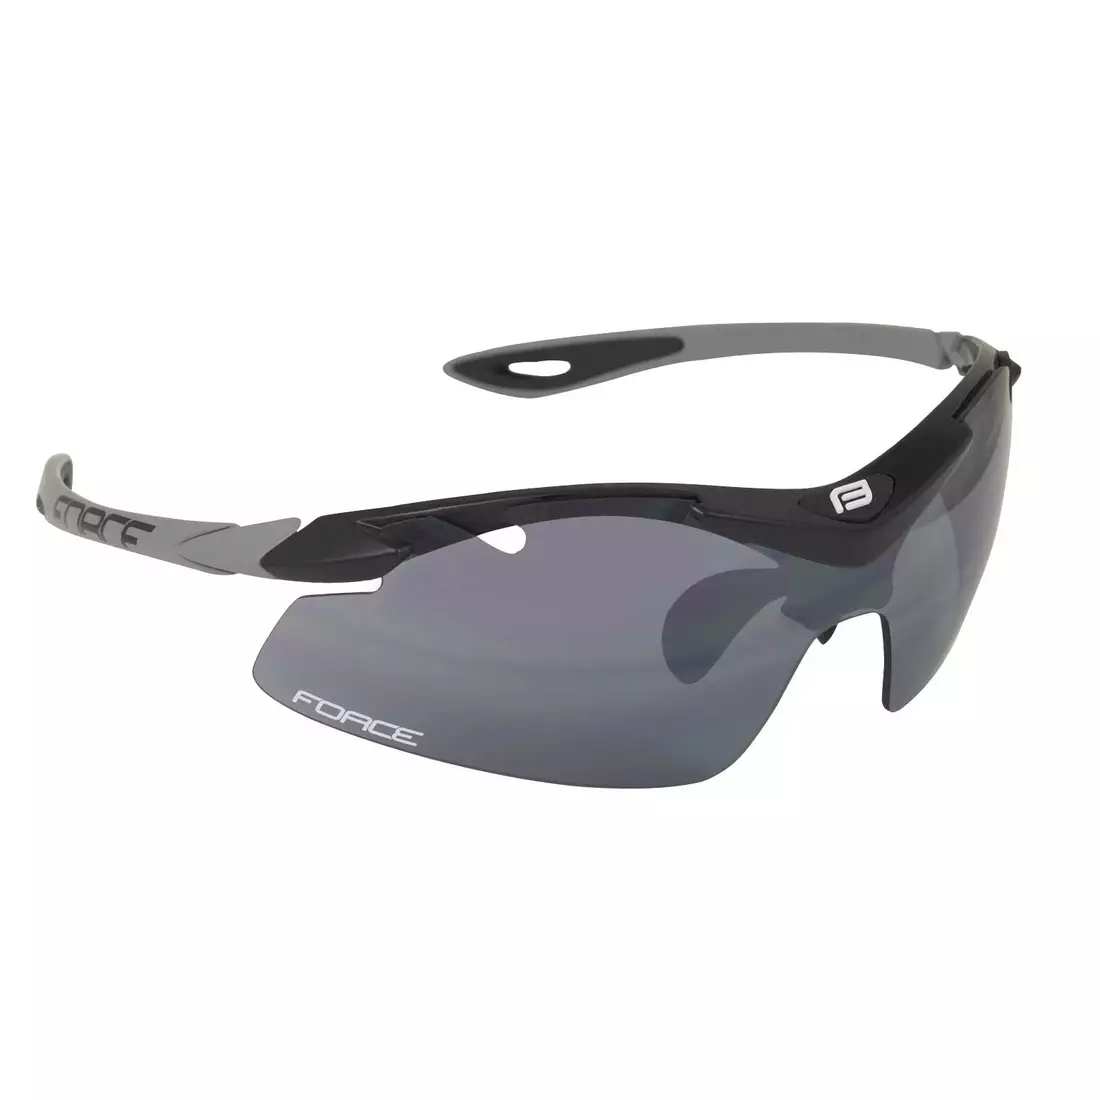 FORCE DUKE glasses with replaceable lenses, black 91024